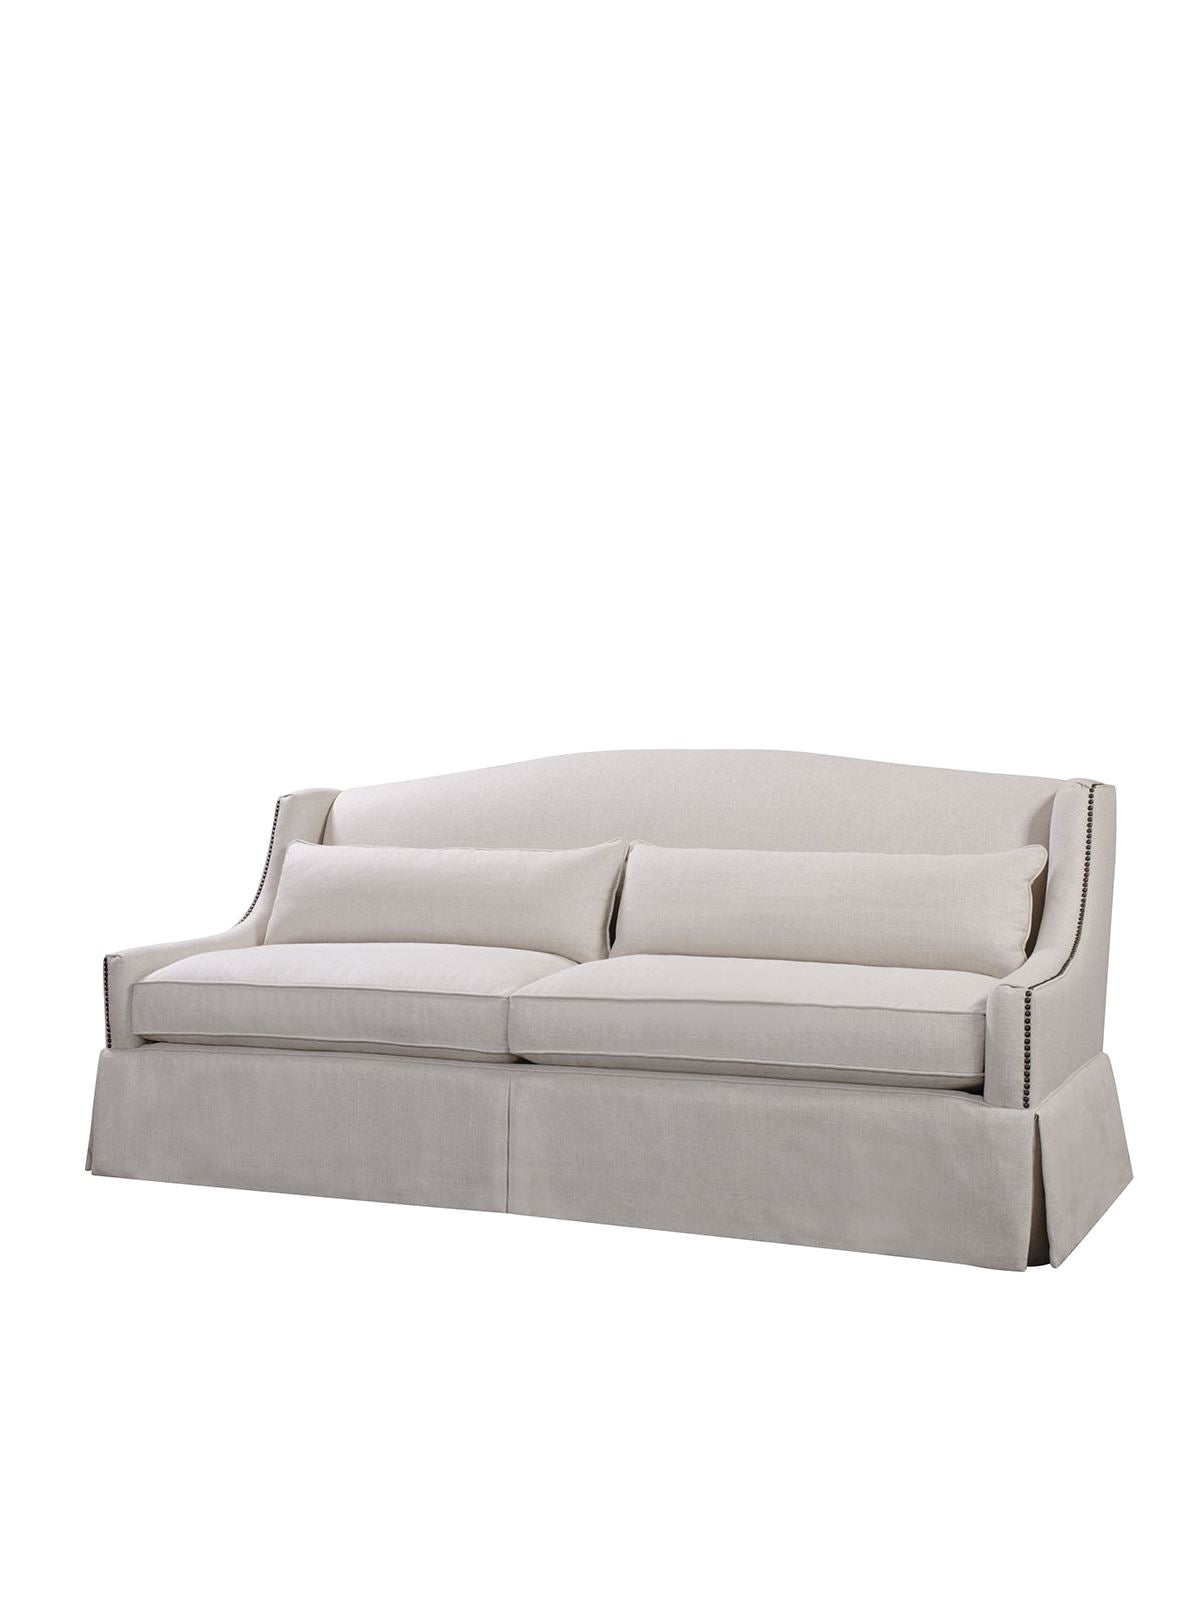 Belmont 89" Sofa by Huck & Peck SOFA Huck and Peck